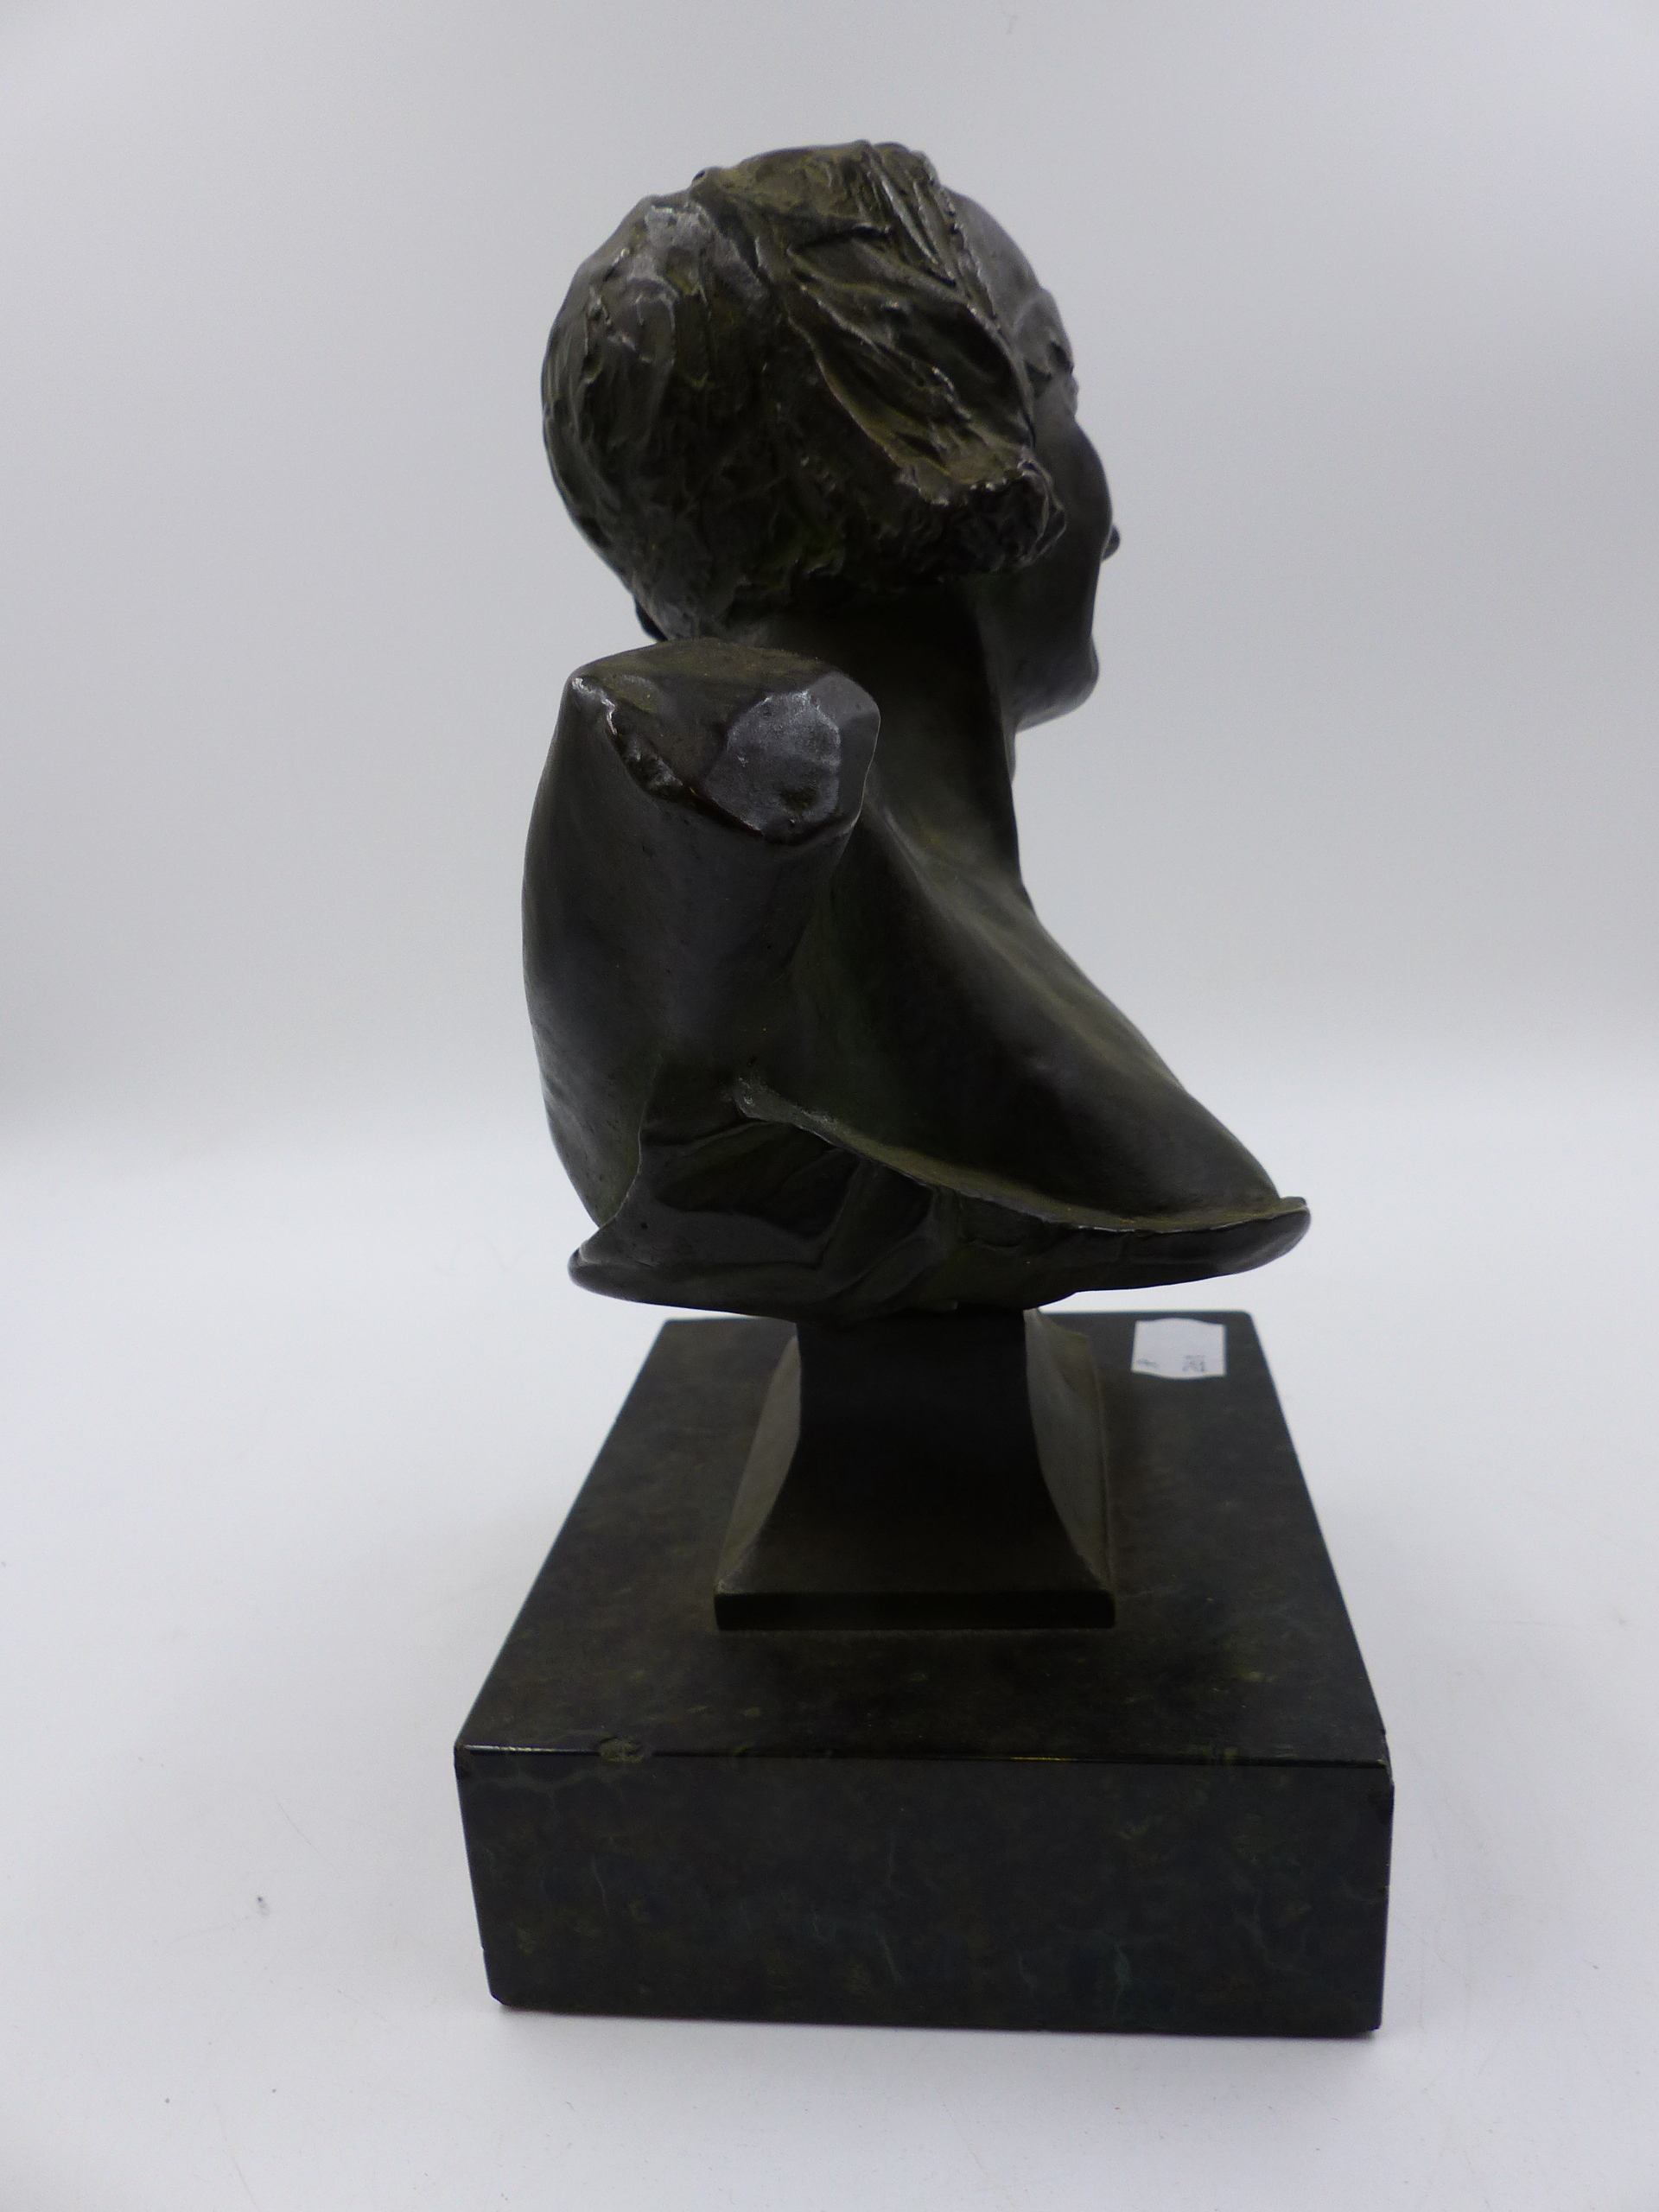 ATTRIBUTED TO SIR WILLIAM REID DICK (1978-1961) A BUST PORTRAIT OF A LADY BRONZE ON MARBLE BASE. - Image 6 of 8